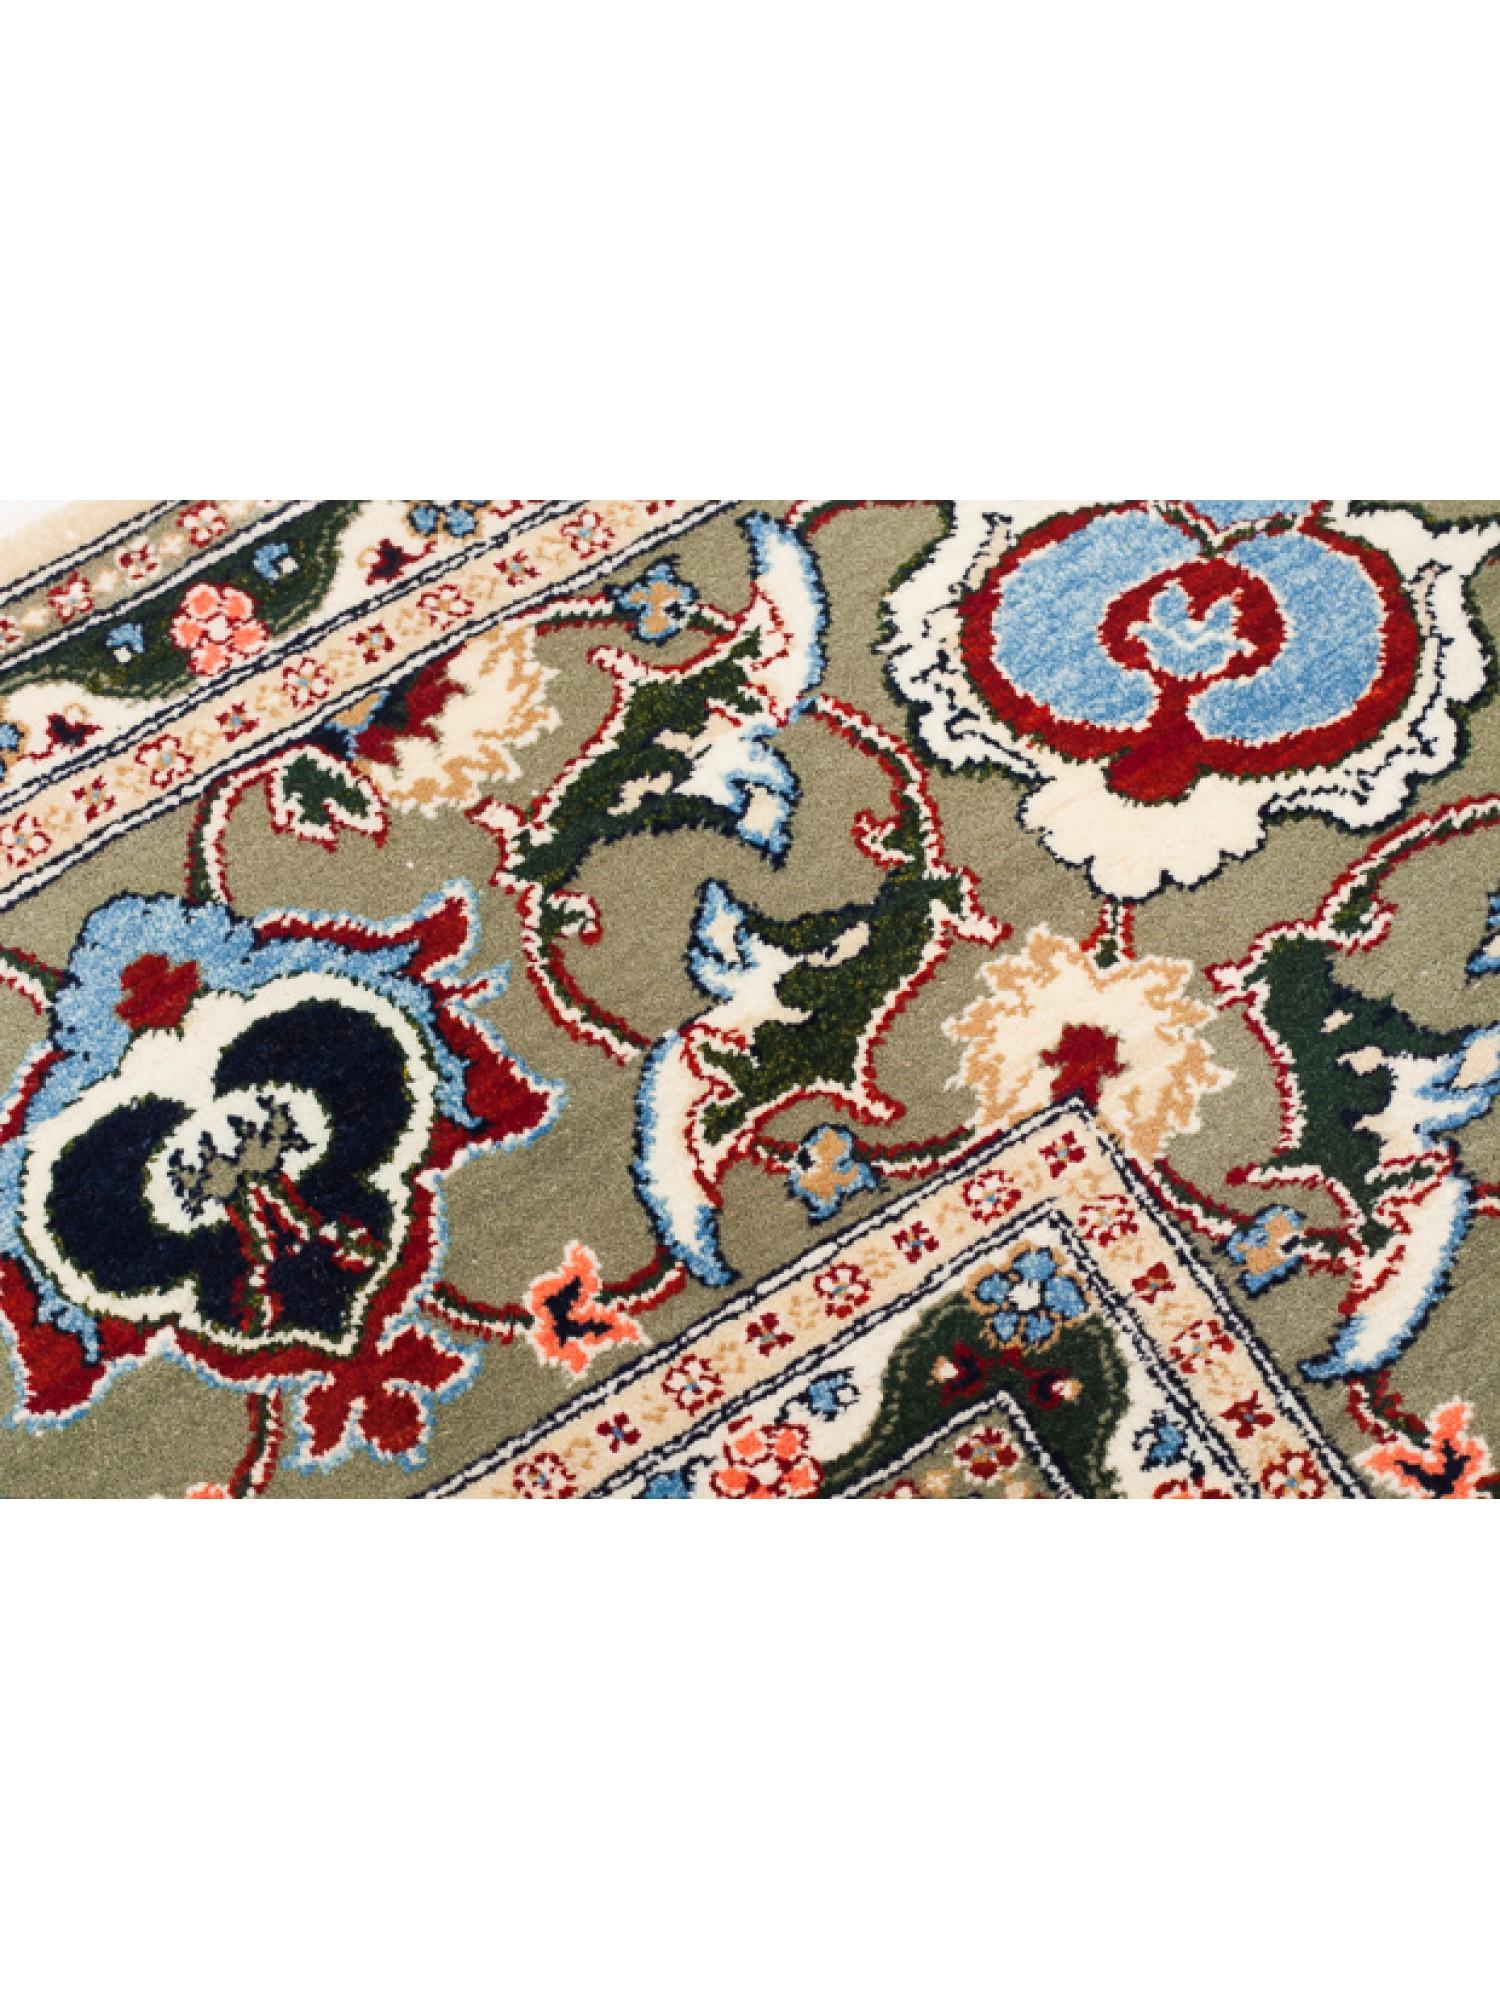 This unique Wool Hereke Carpet is among the highest-quality carpets in the Hereke workshop. There is a flower lattice on a beige background and light khaki green with the fineness of the weave, the use of color, and the elegant and sophisticated